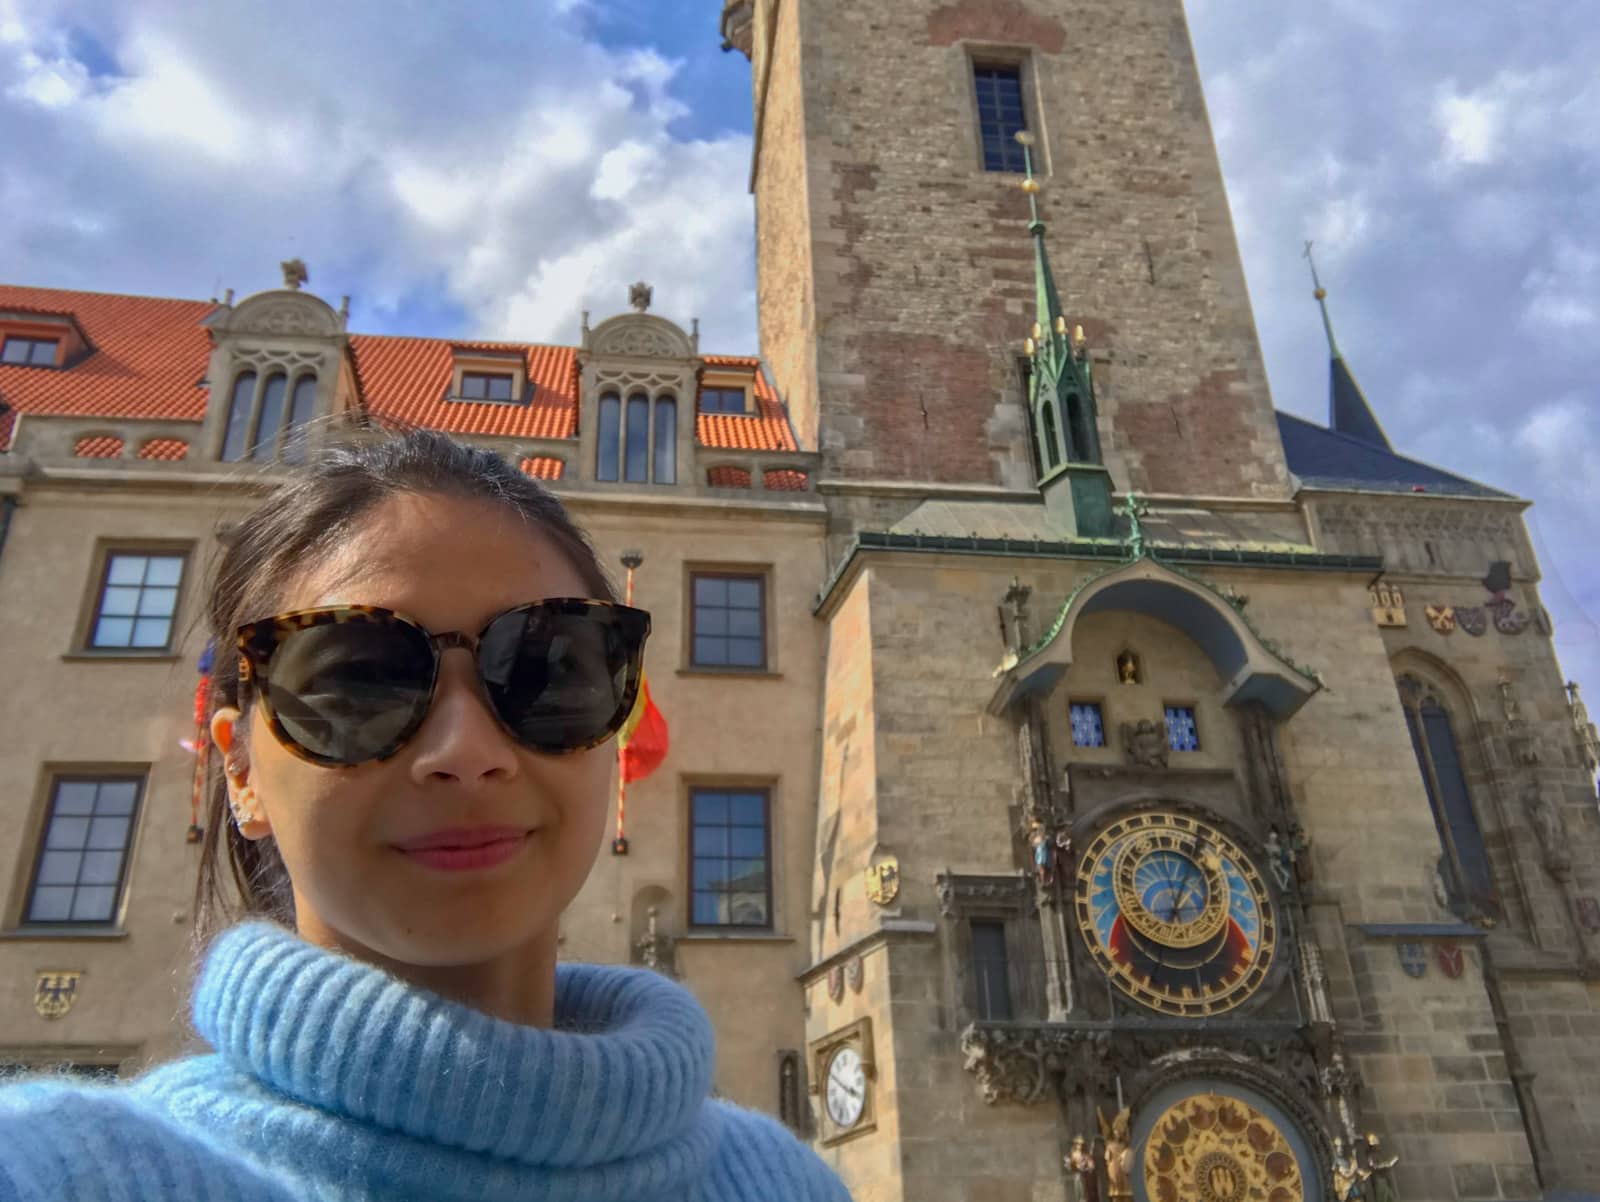 A woman taking a selfie in front of the Astronomical Clock in Prague. She has big round sunglasses on.